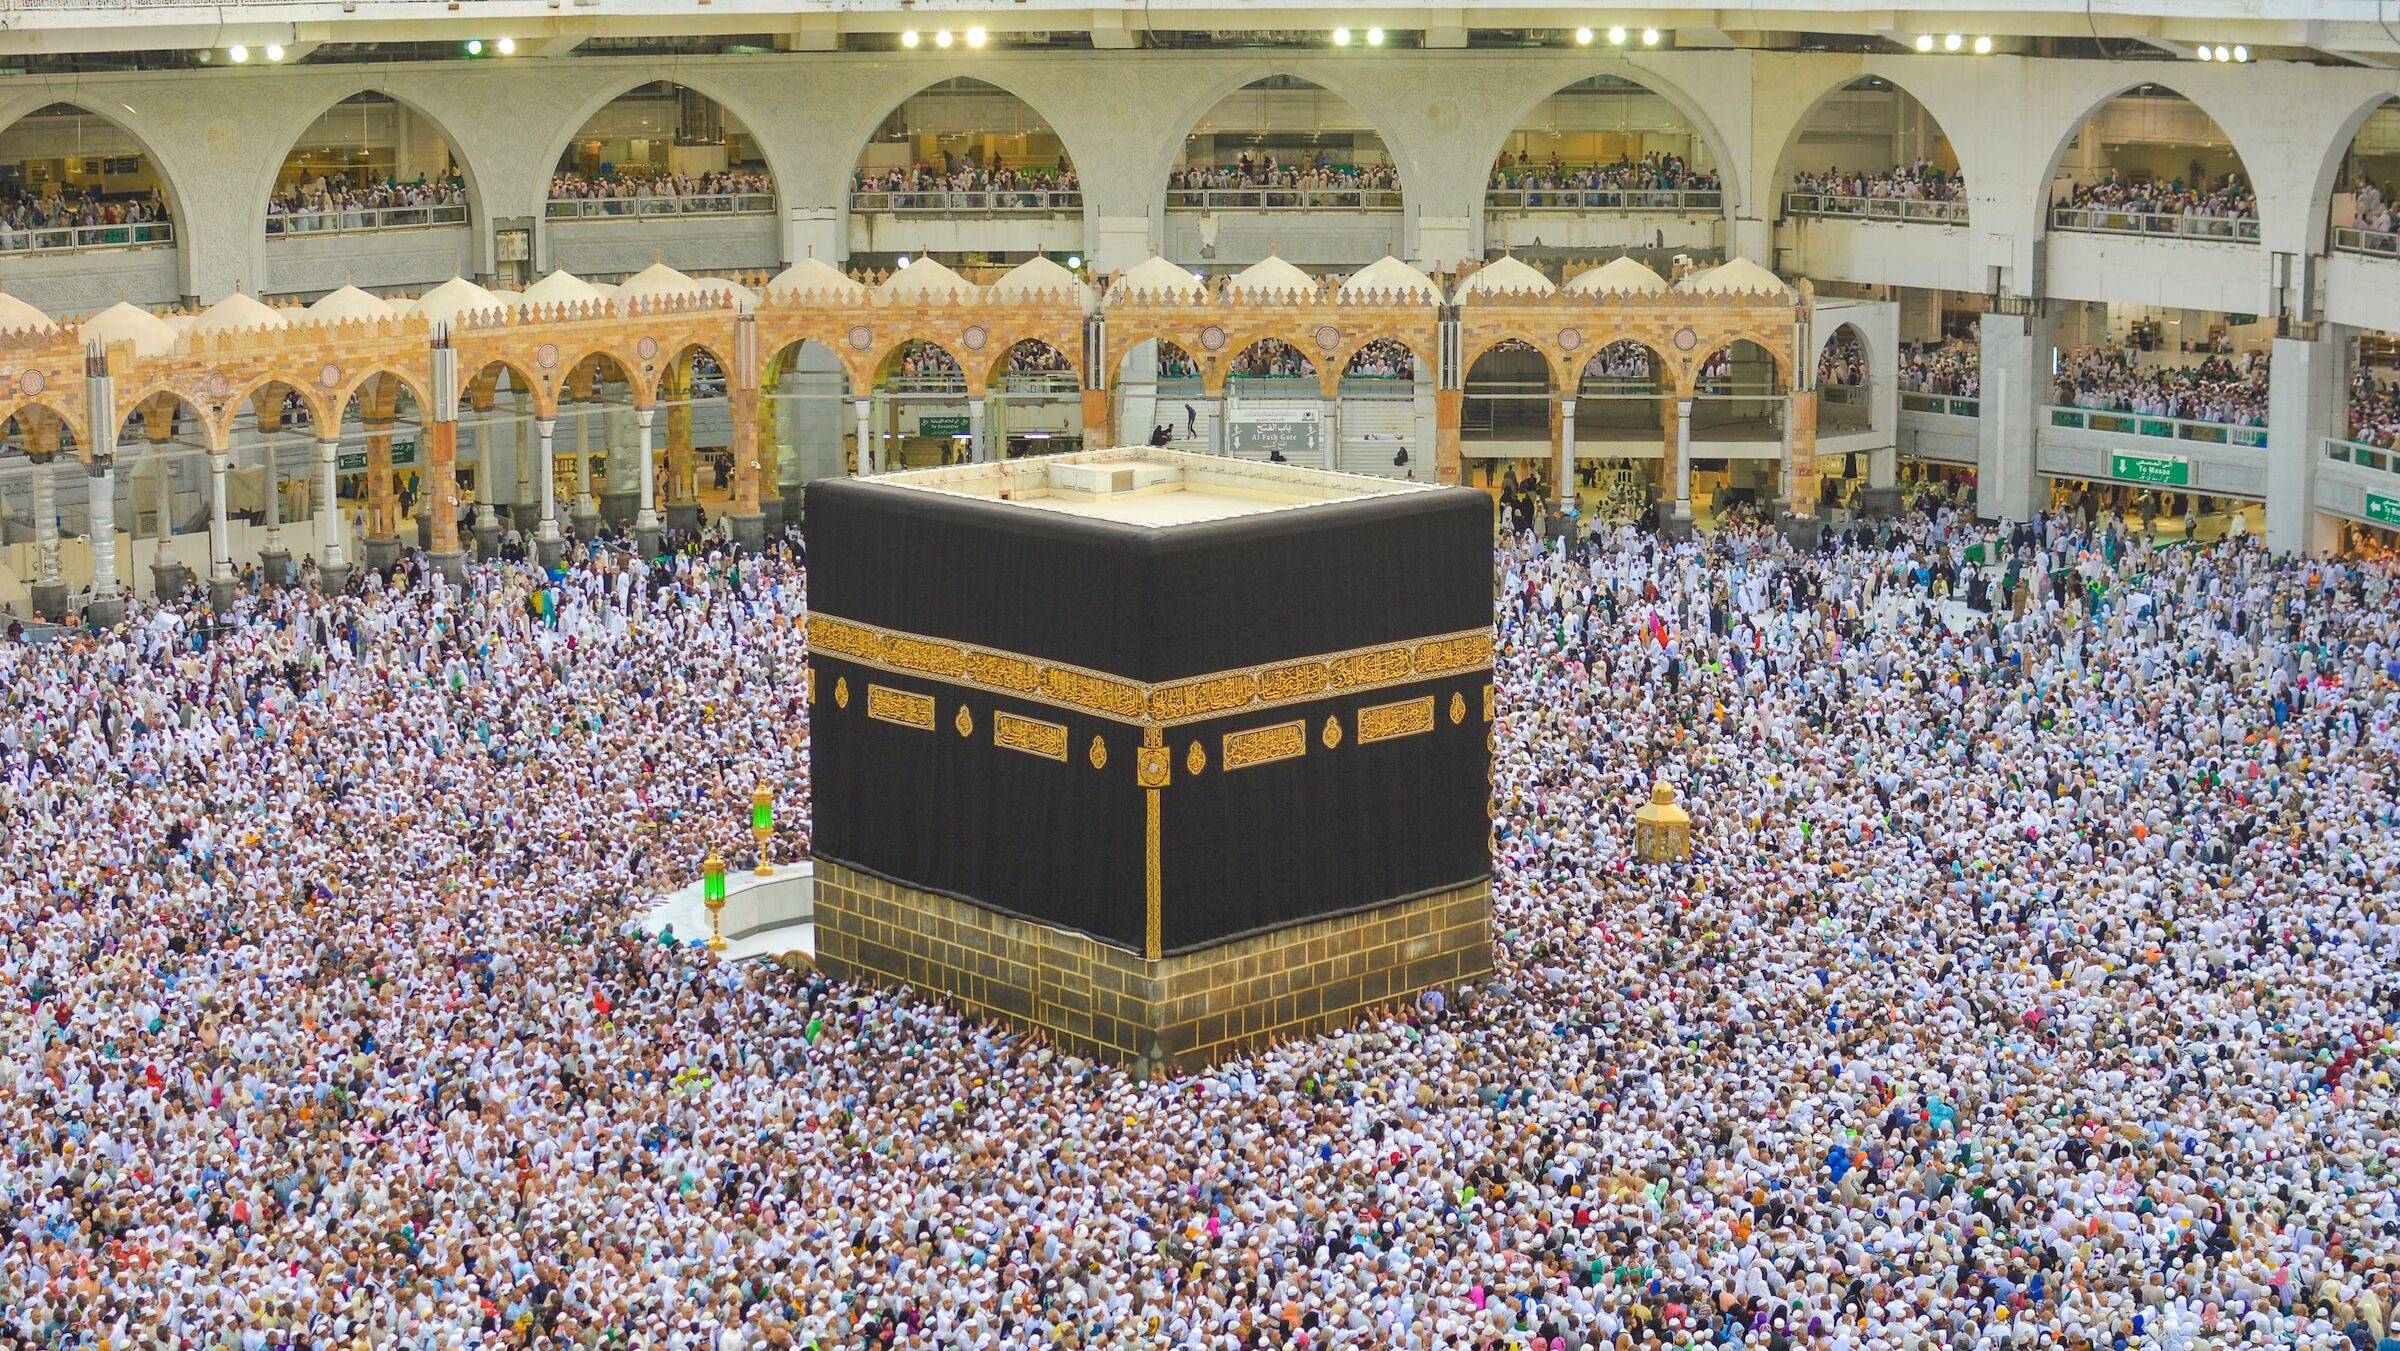 Kaaba is the holiest place for muslims